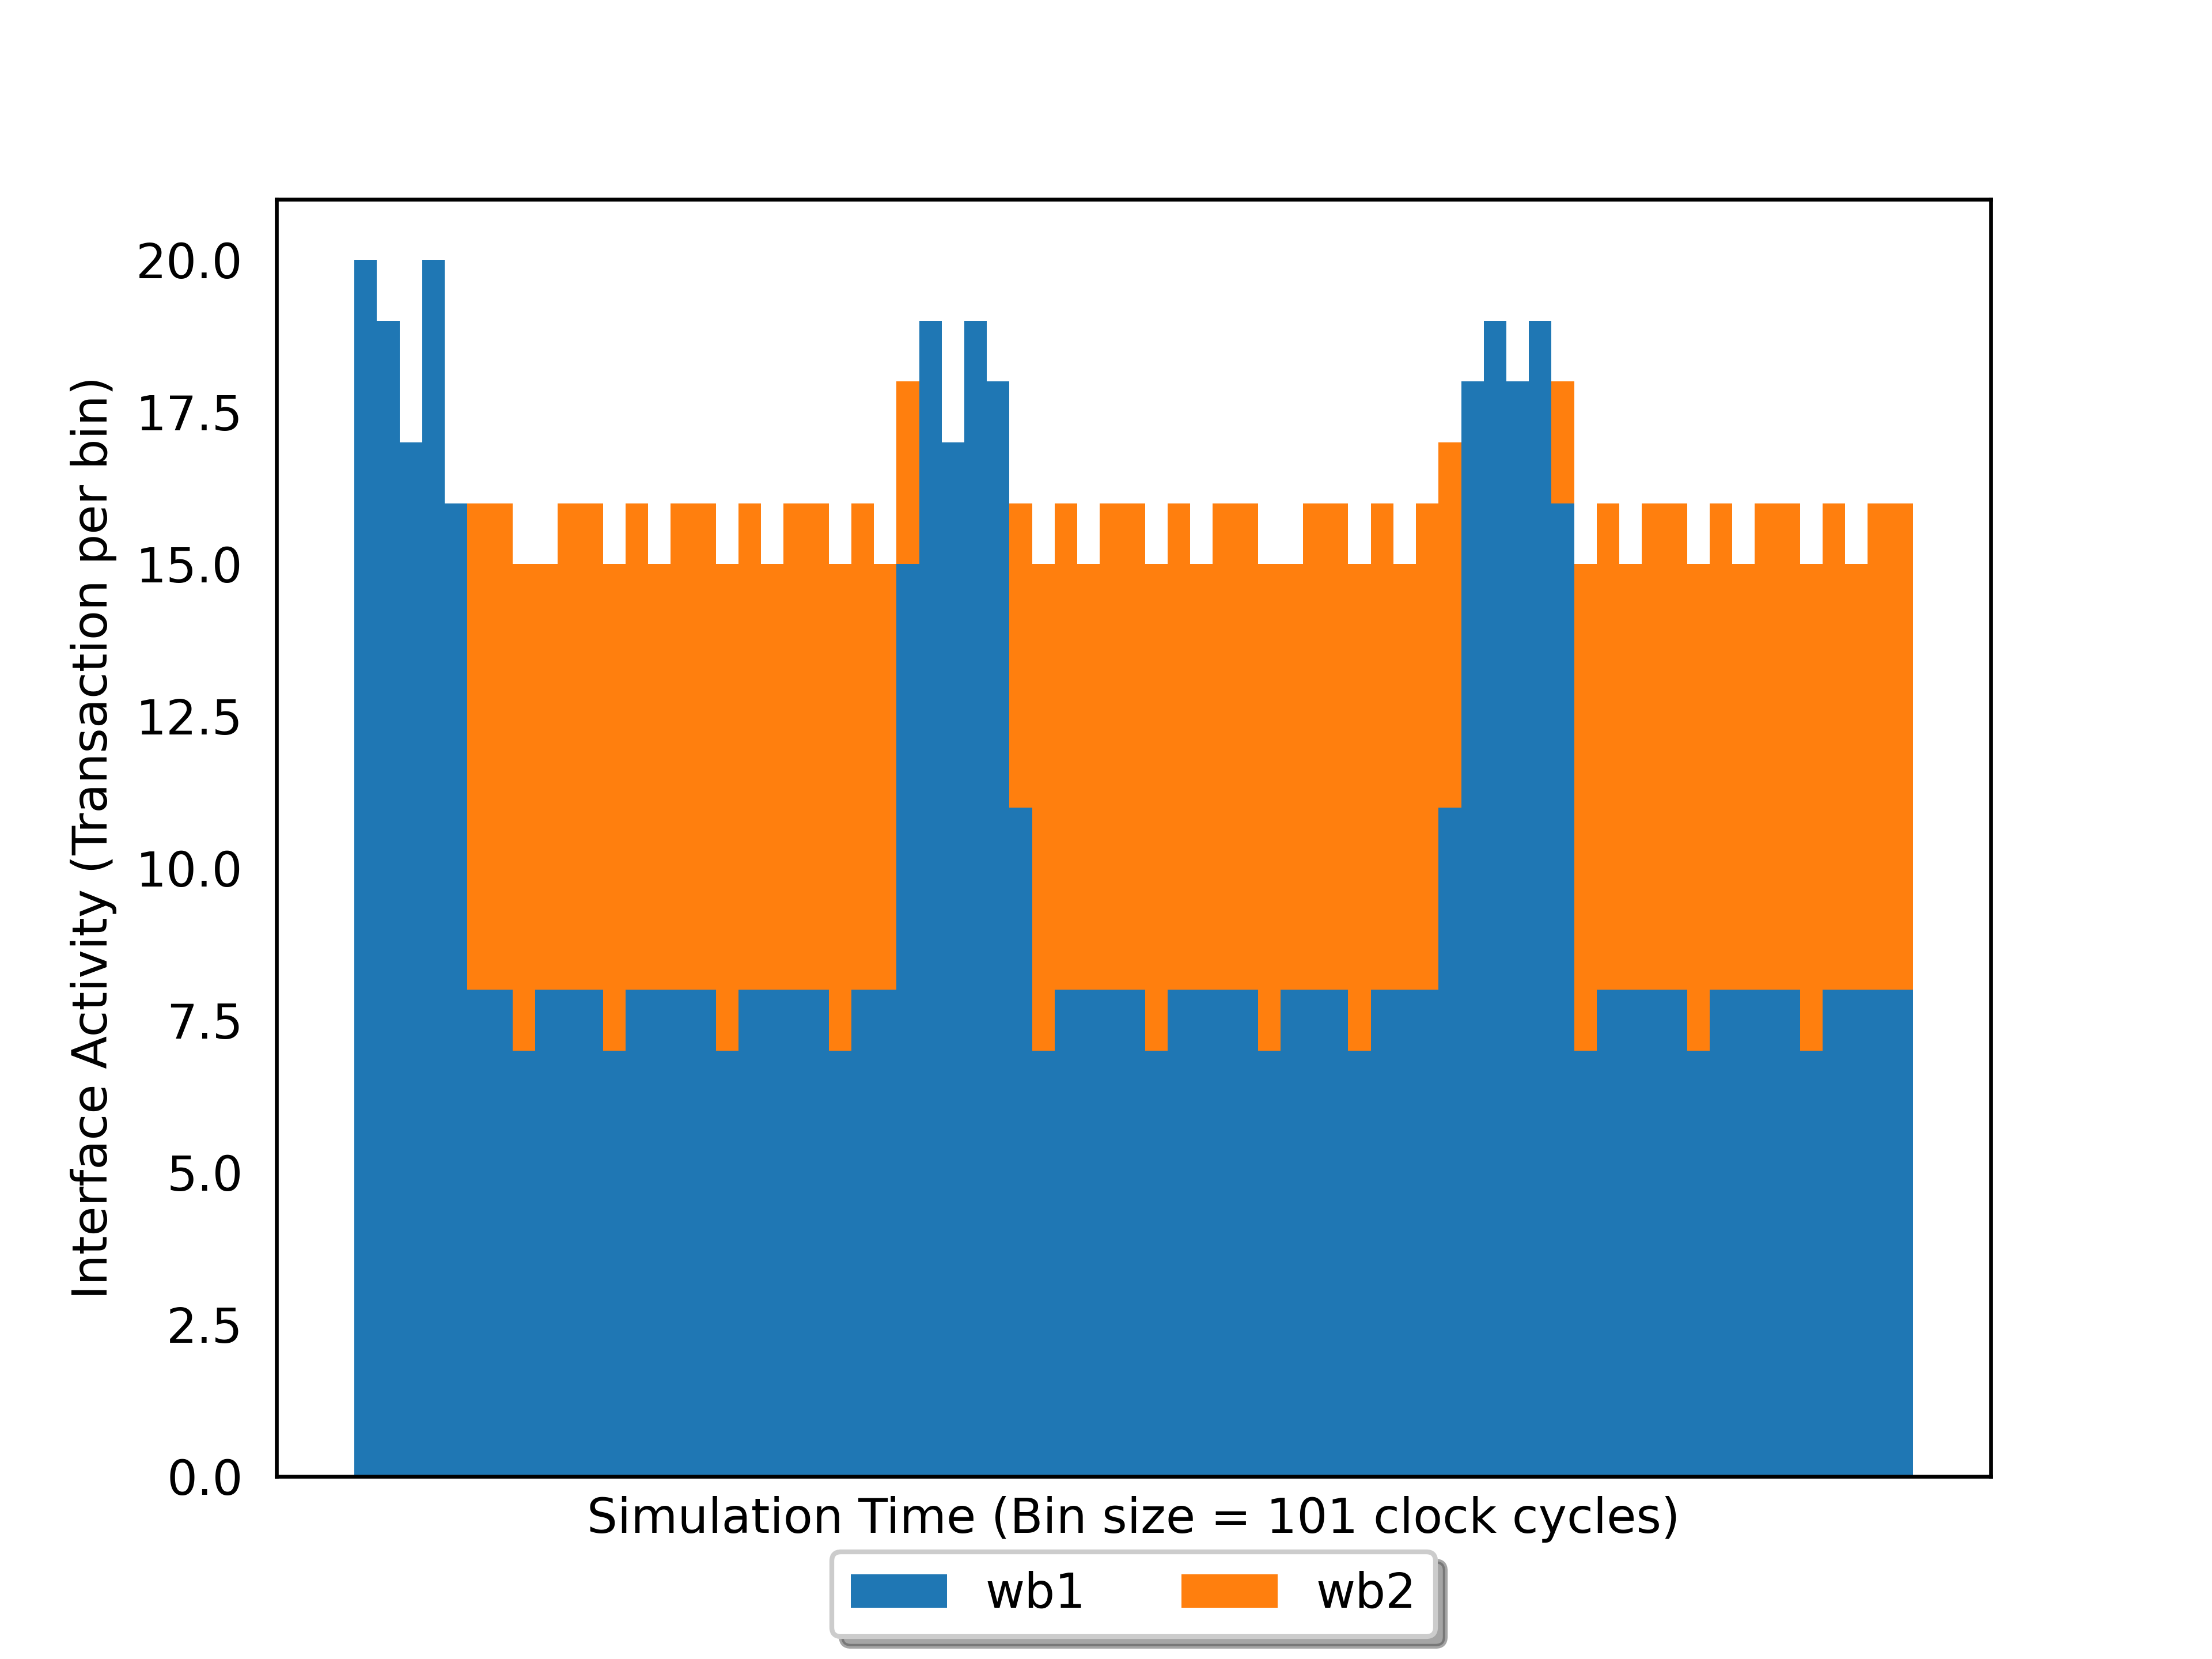 Histogram showing the number of bus transactions over time